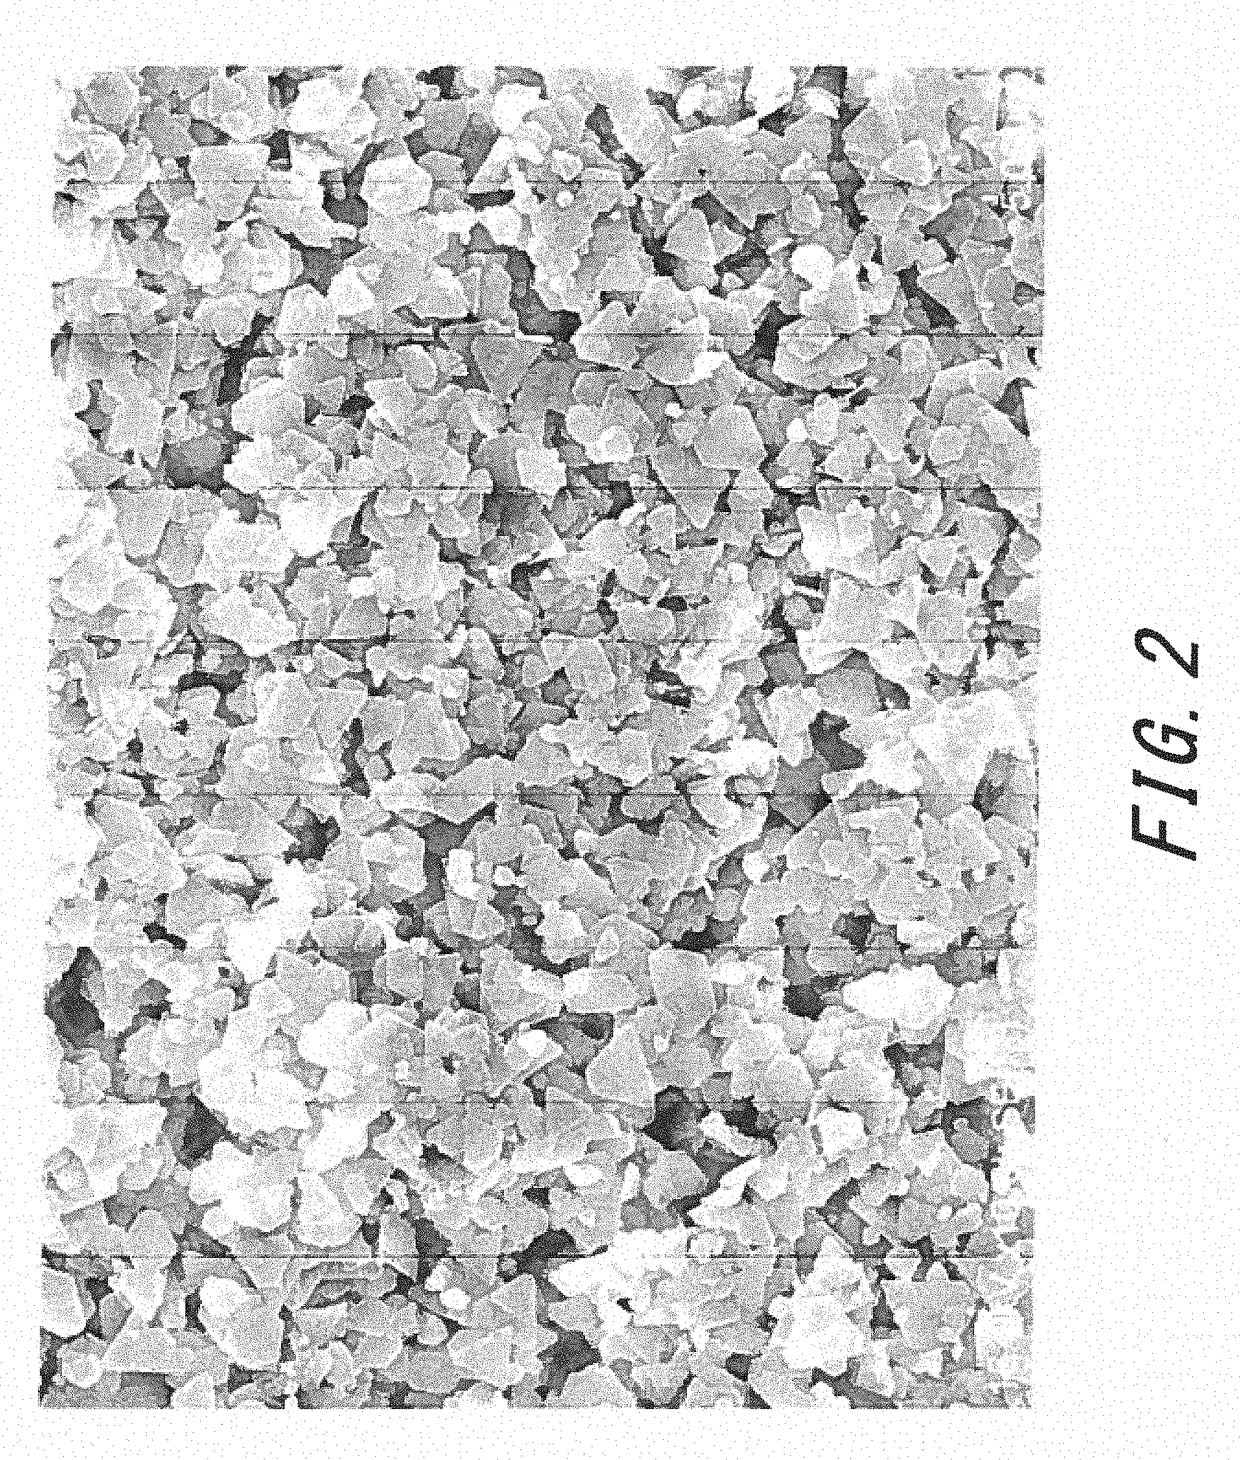 Electrically conductive fine particles